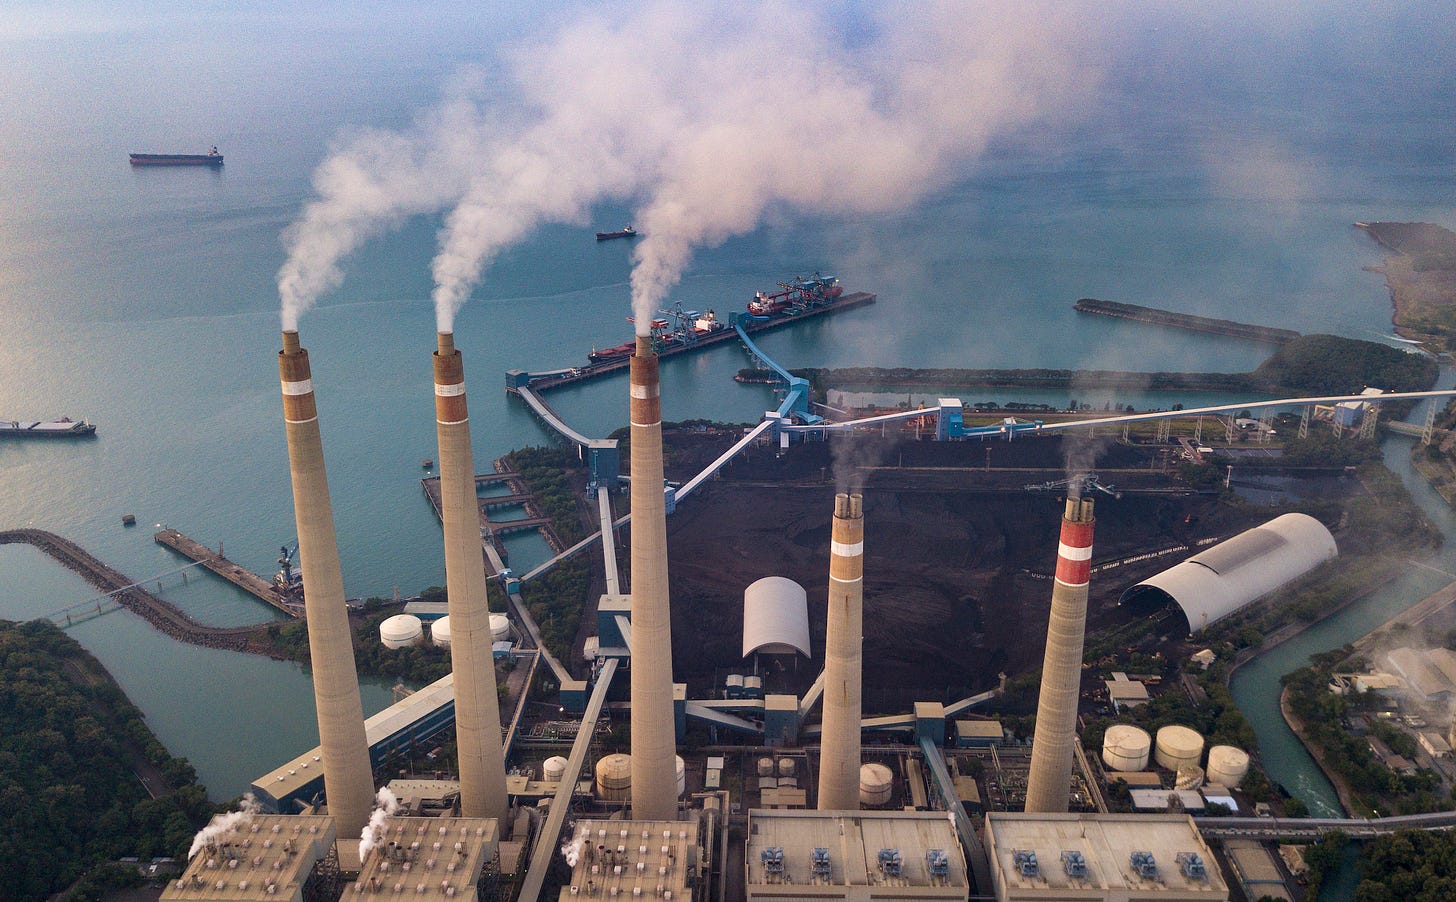 Suralaya coal power plant in Indonesia’s Banten province. The country, which has the second largest operating and planned coal-based capacity linked to China, has been under domestic and external pressure to transition away from fossil fuels. (Image © Kasan Kurdi/Greenpeace)